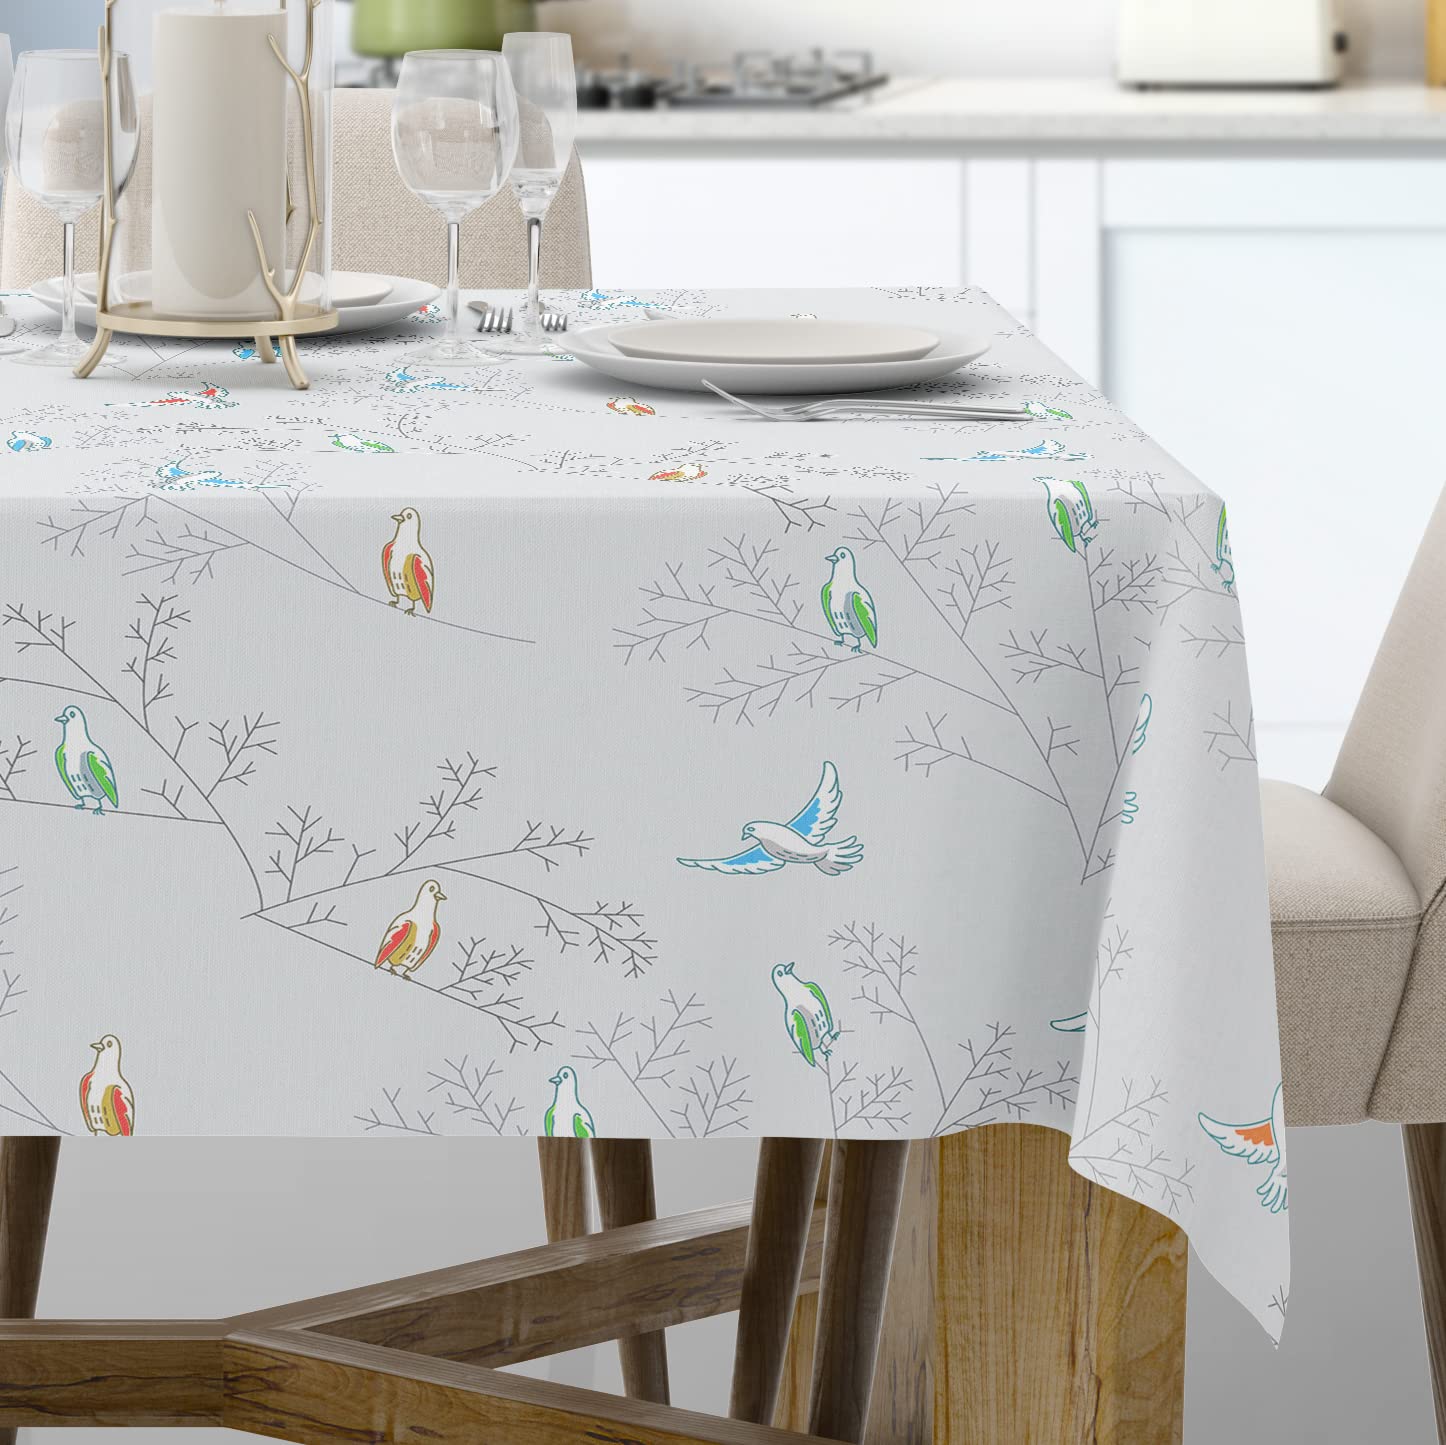 ADORNLITE PVC Wipeable Table Cloth - 137 x 200cm in Rectangle Shape, Pigeon Bird Design - Waterproof , Heat-Resistant & Polyester Backing Plastic Table Covers Wipe Clean for Party, Picnic & BBQ